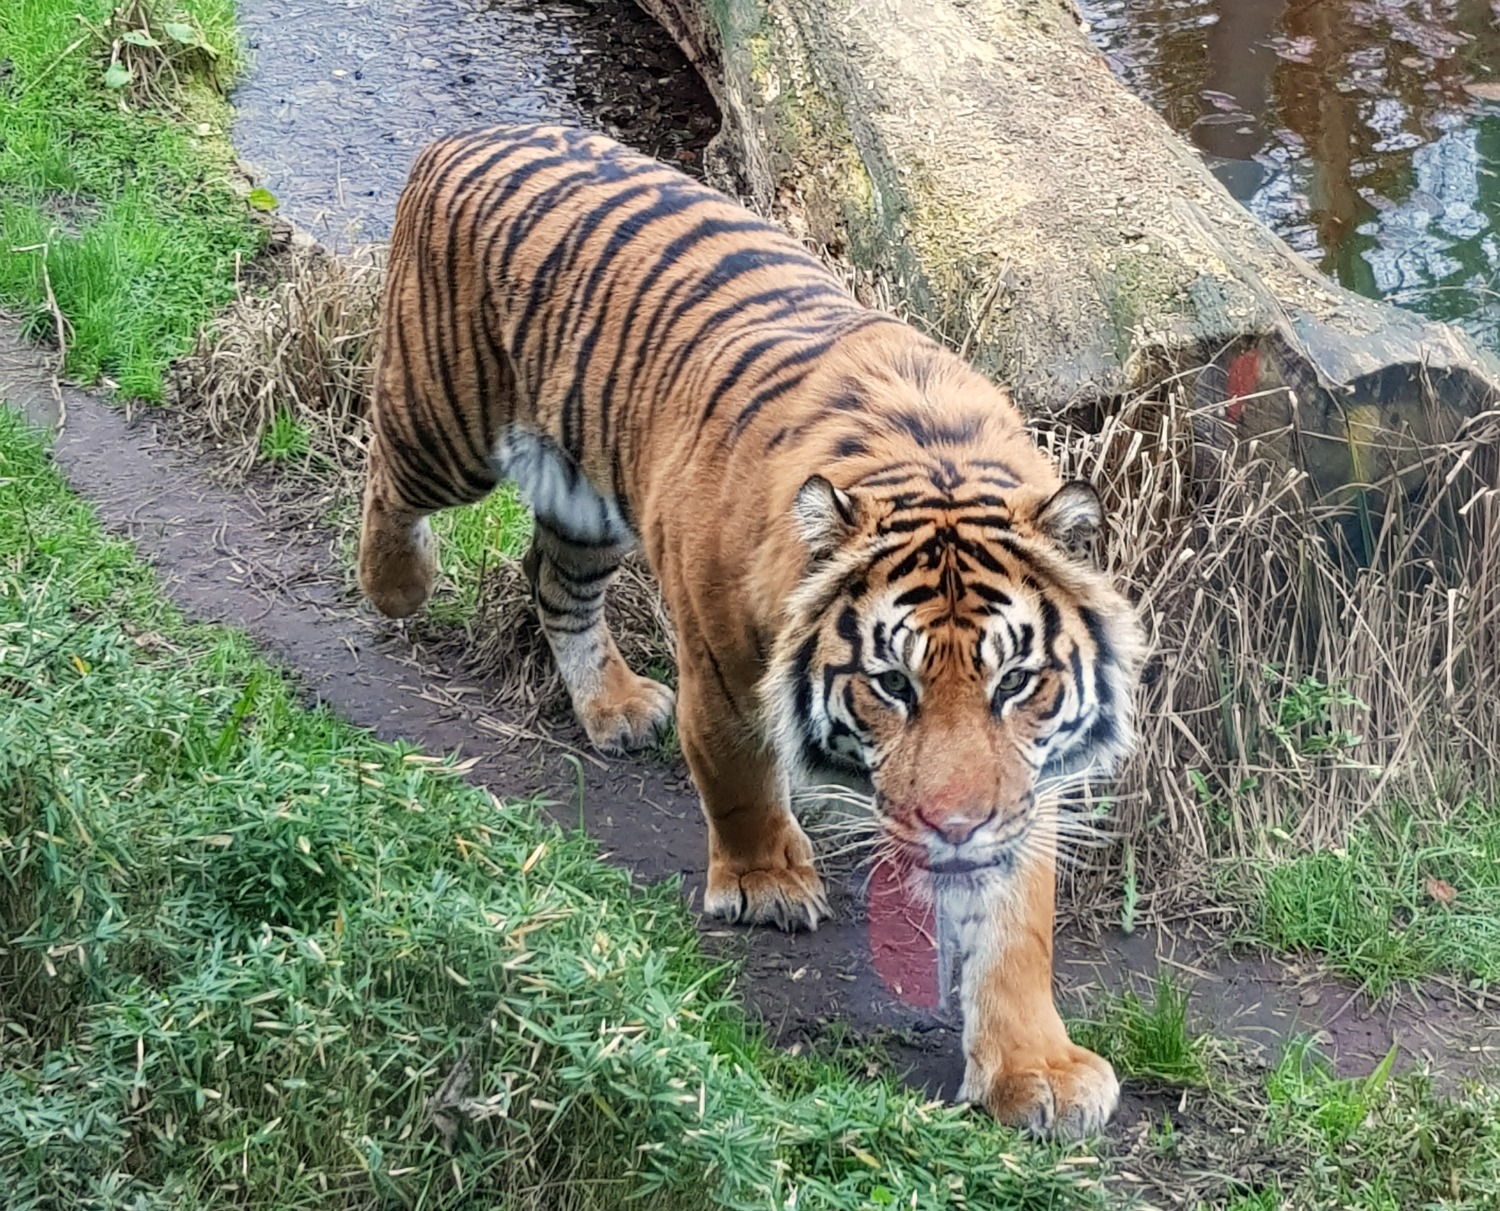 Tiger prowls through its enclosure at feeding time - my tips for visiting London Zoo with kids